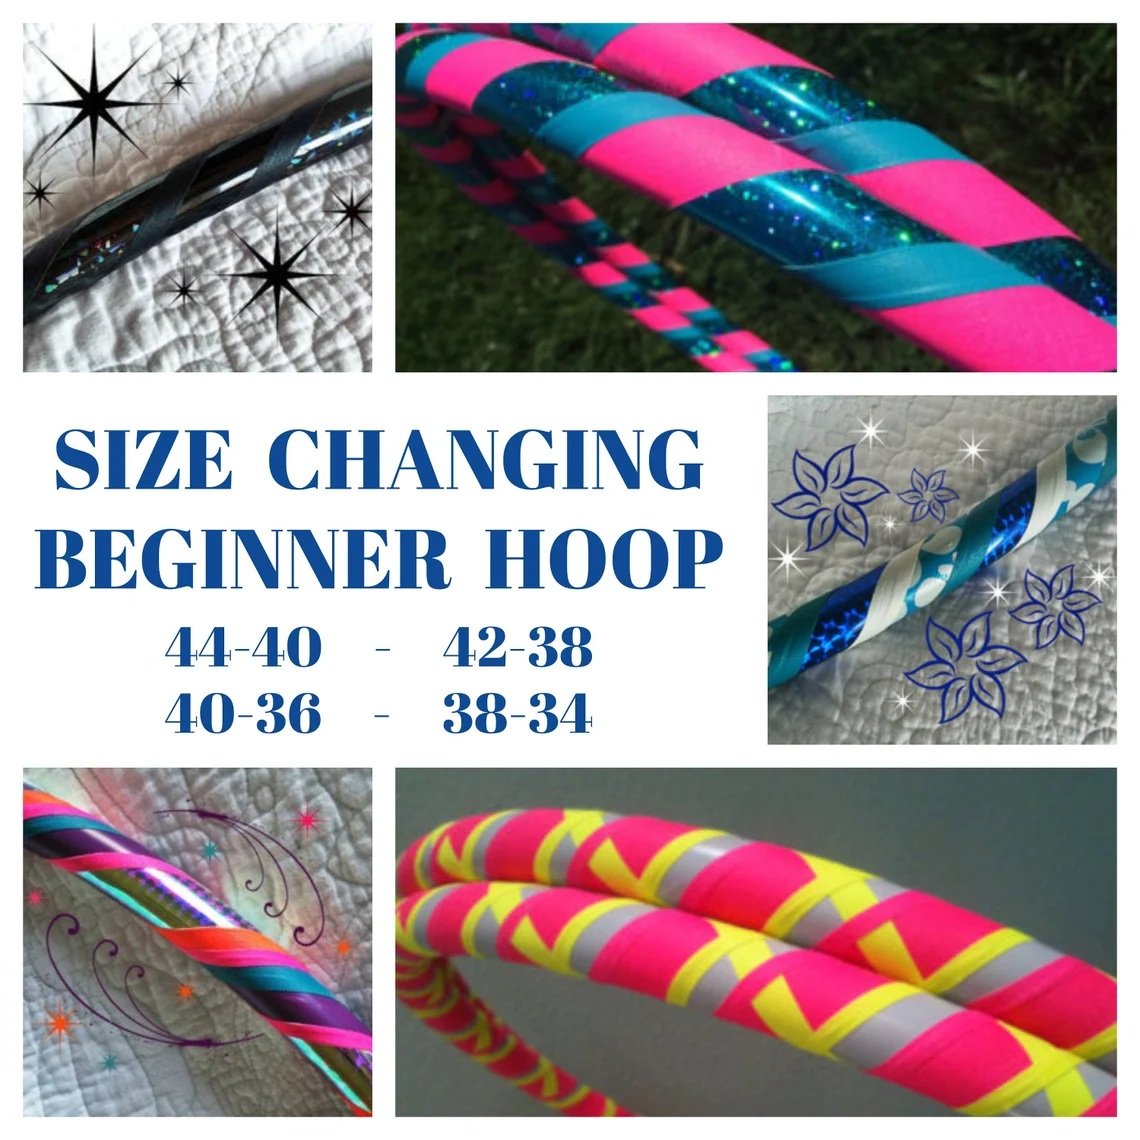 SIZE CHANGING HOOP